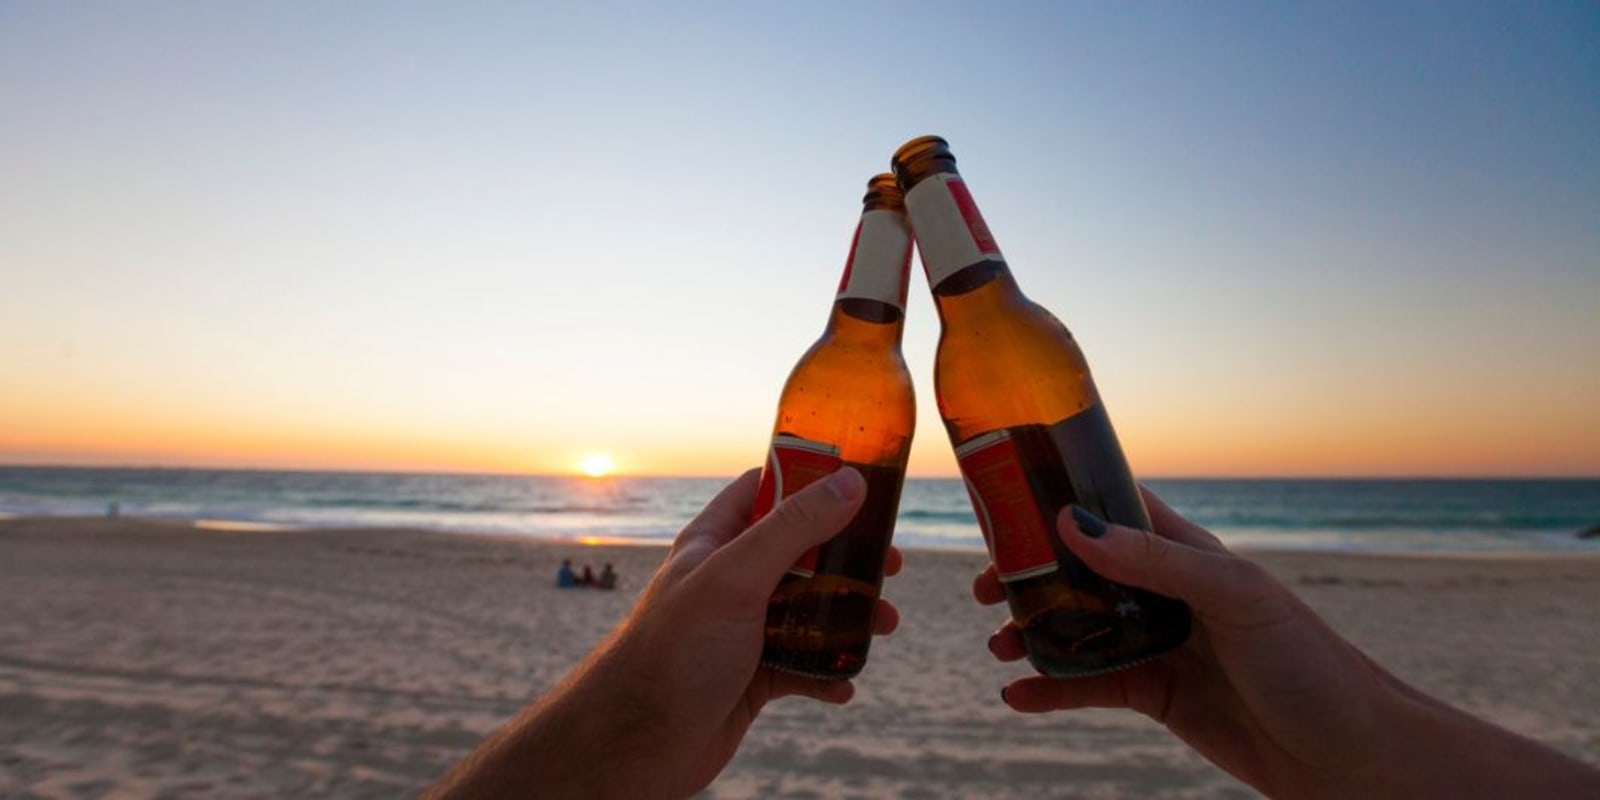 Two people cheersing a beer as they watch a sunset on a beach